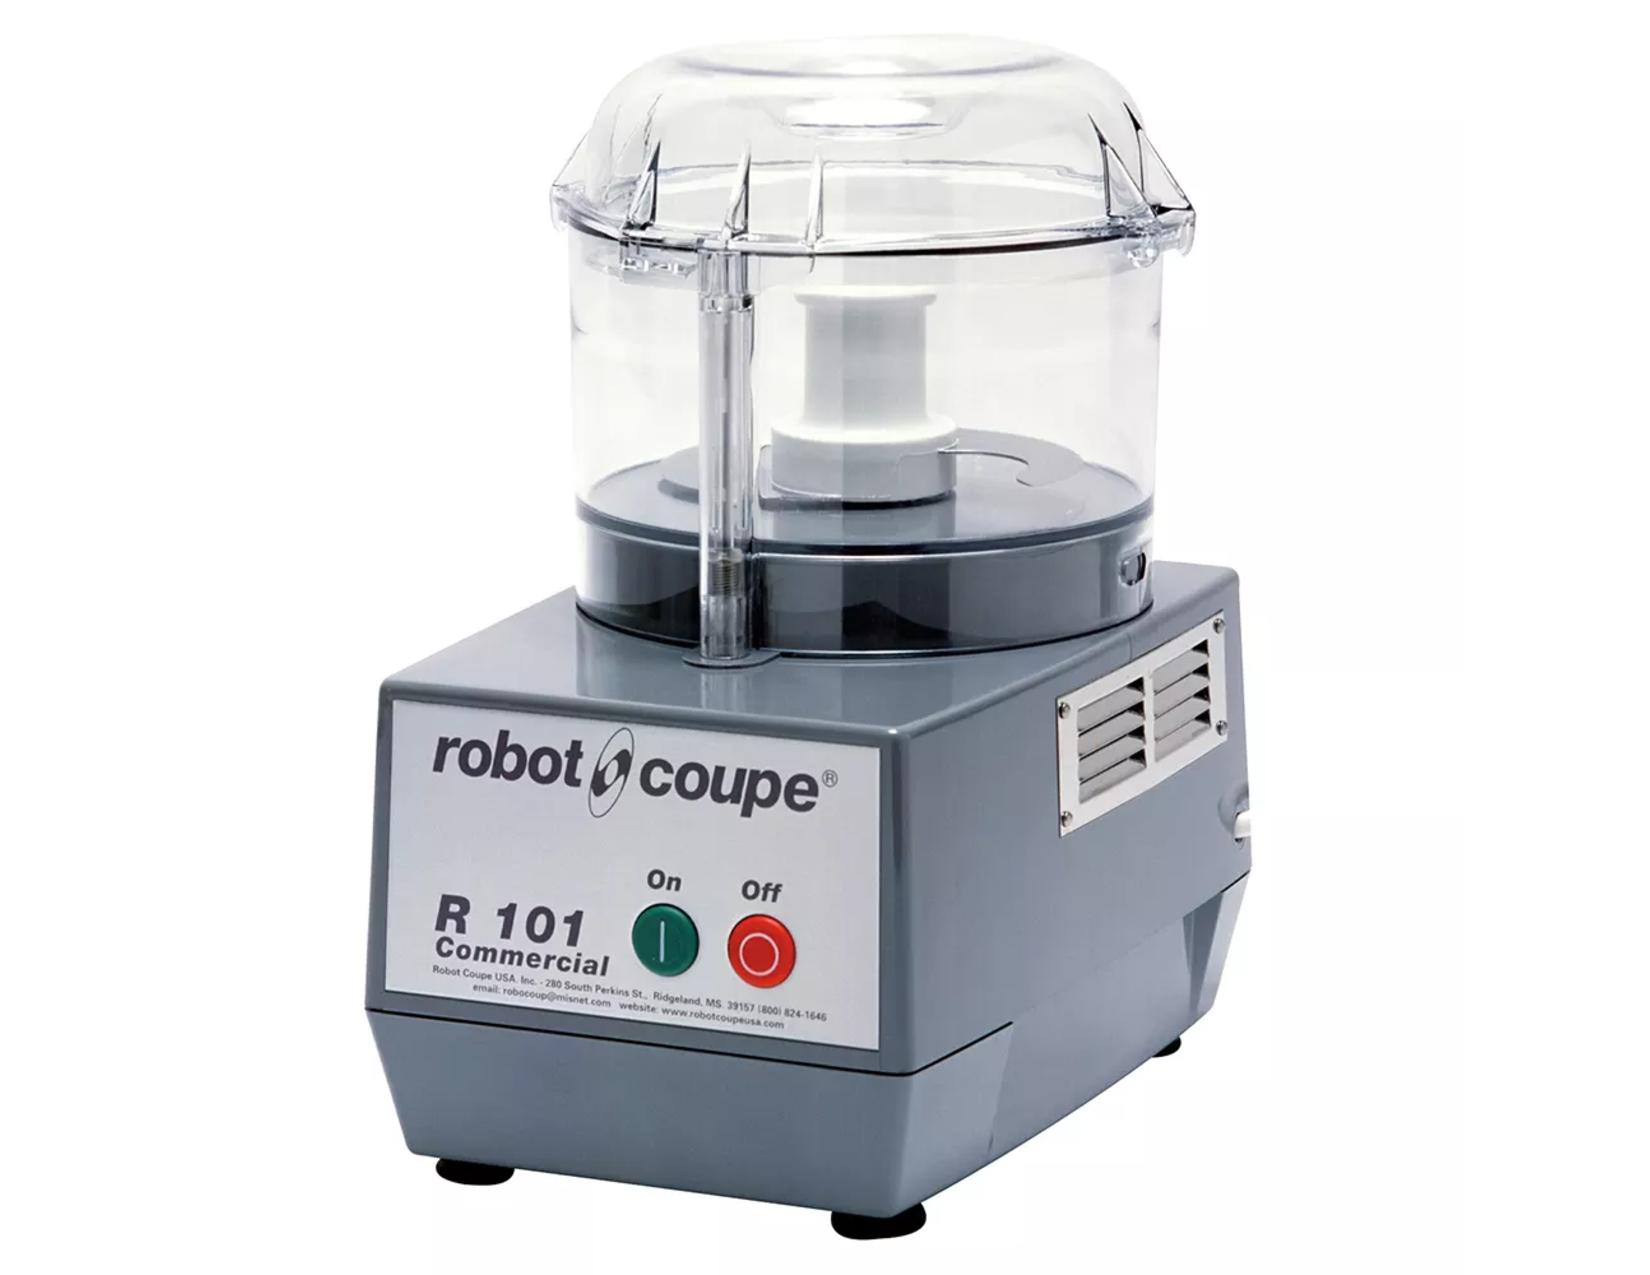 Coupe R 101 CLR Commercial Food Processor with 2.5-Quart Clear Polycarbonate Bowl, 120-Volts Based Pros